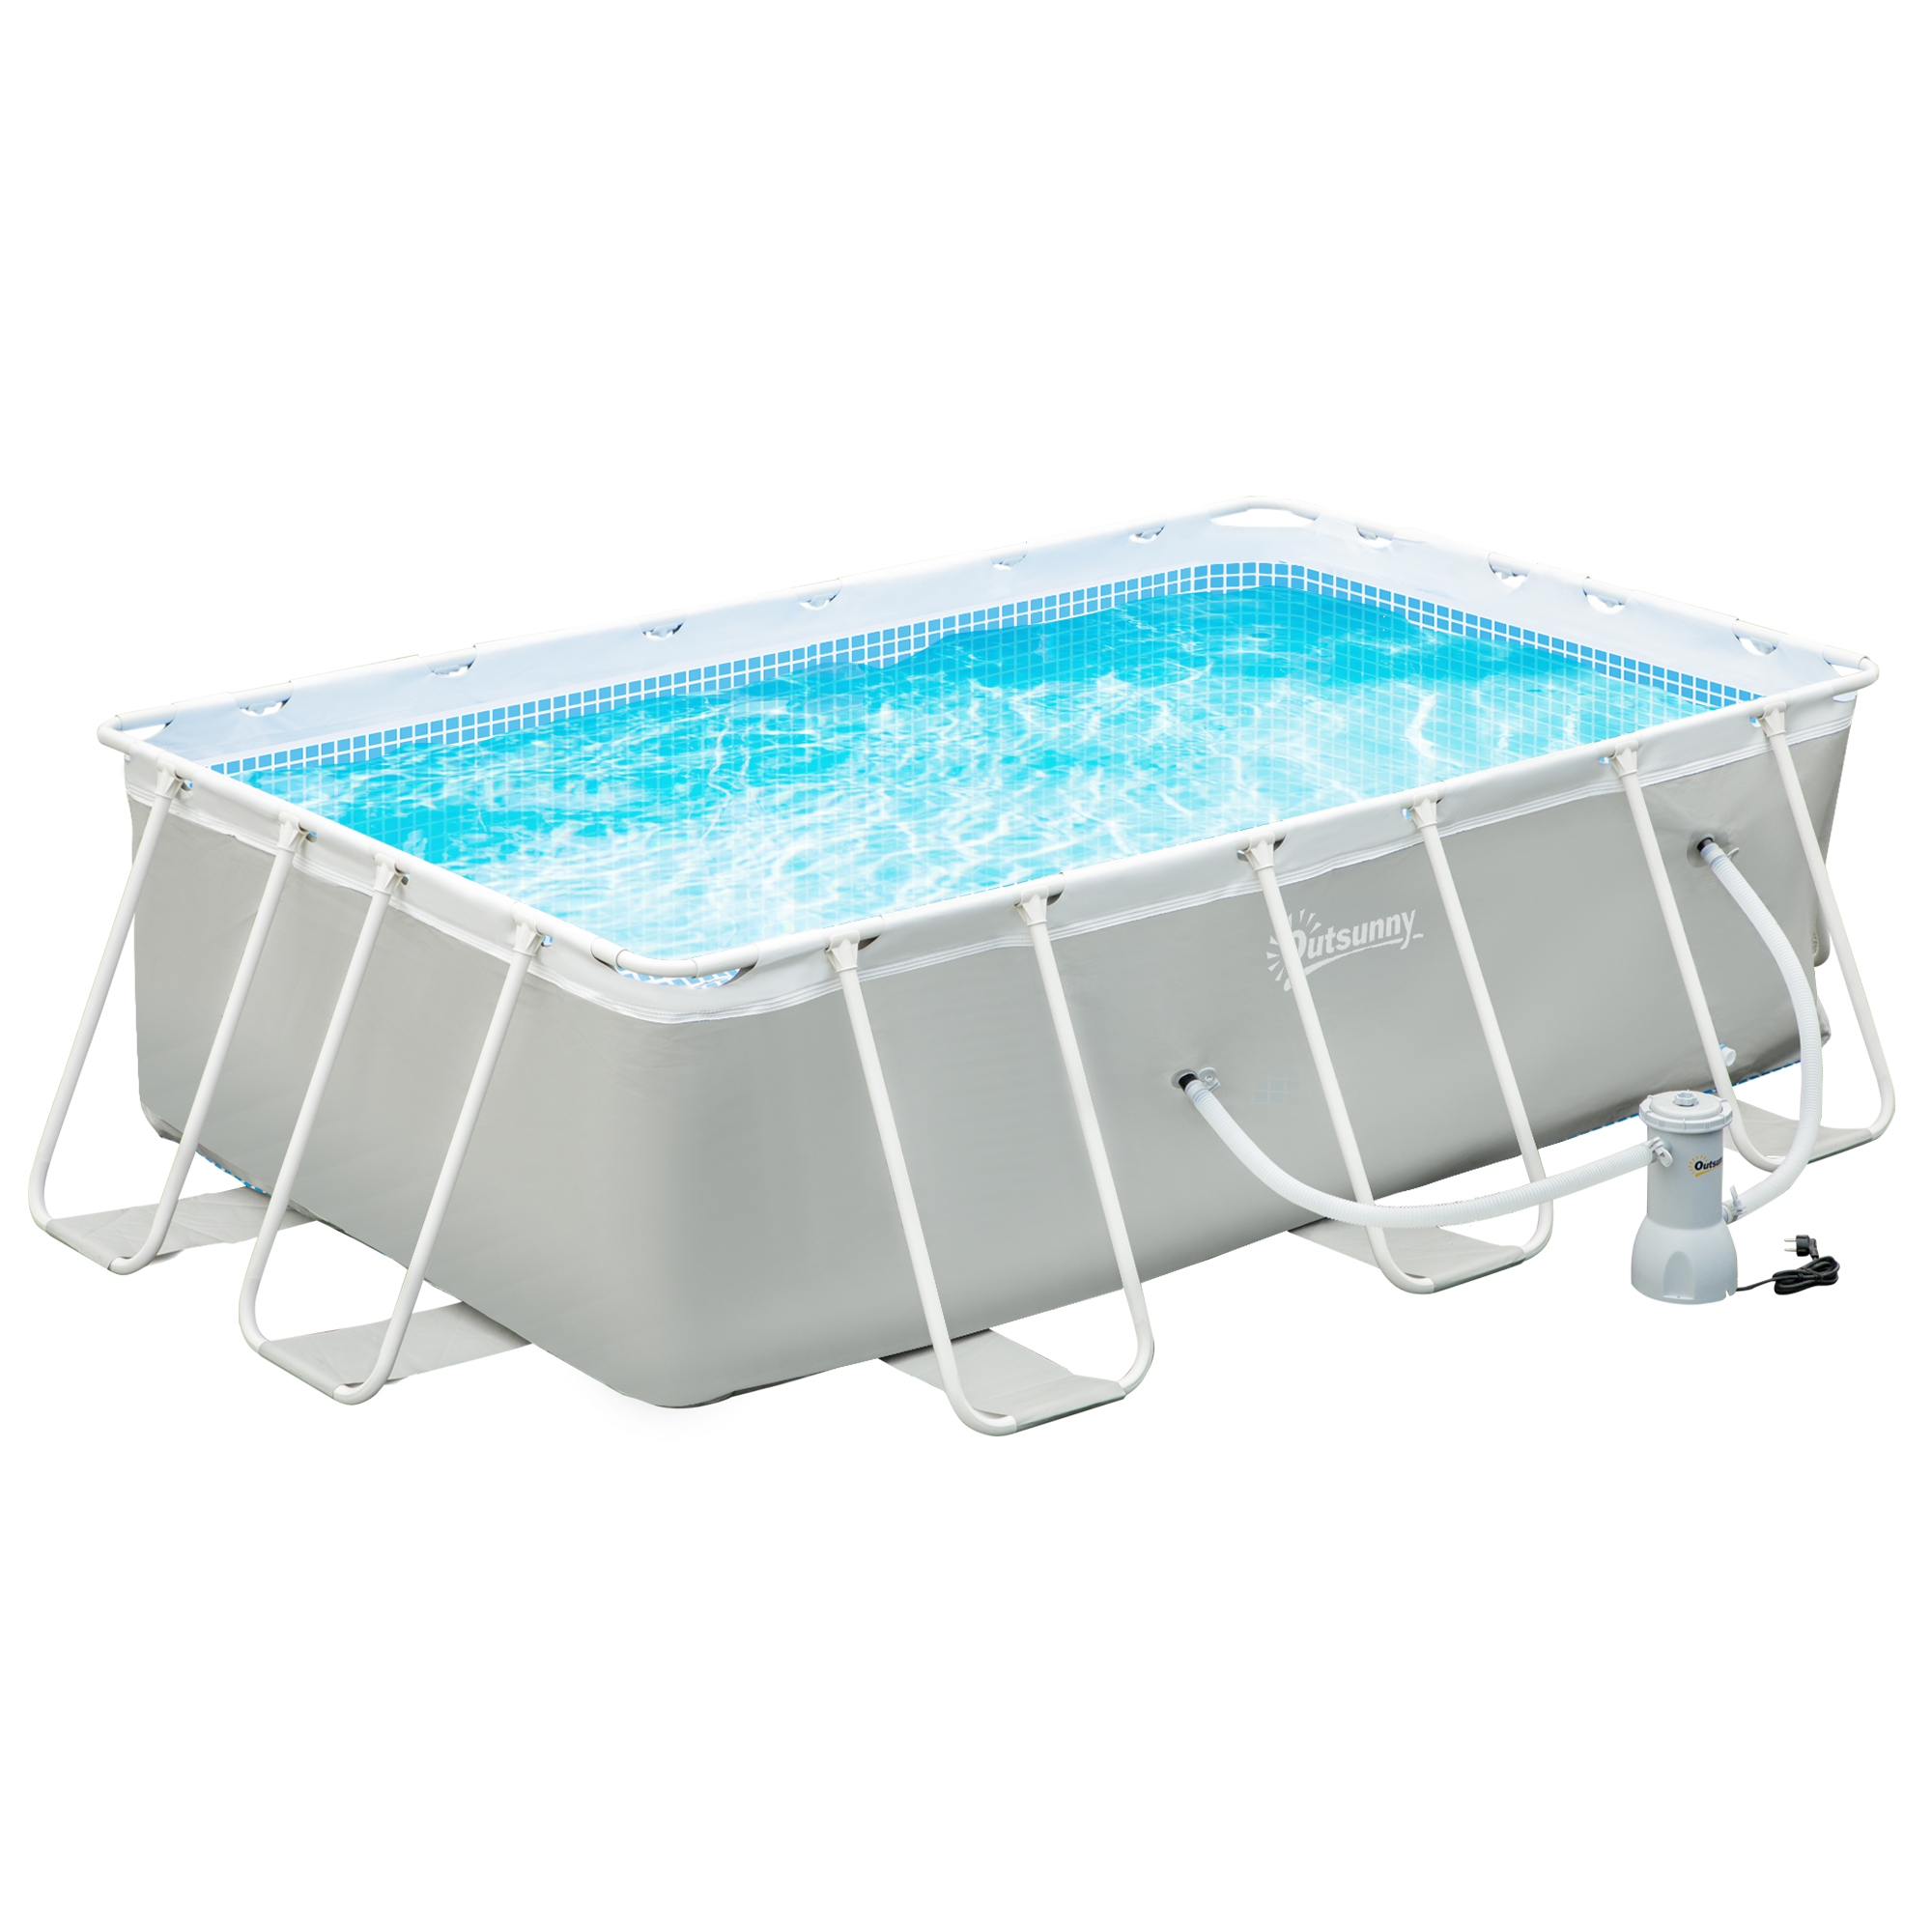 Outsunny Steel Frame Pool With Filter Pump, Outdoor Rectangular Frame Above Ground Swimming Pool, 340 X 215 X 80 Cm, Light Grey